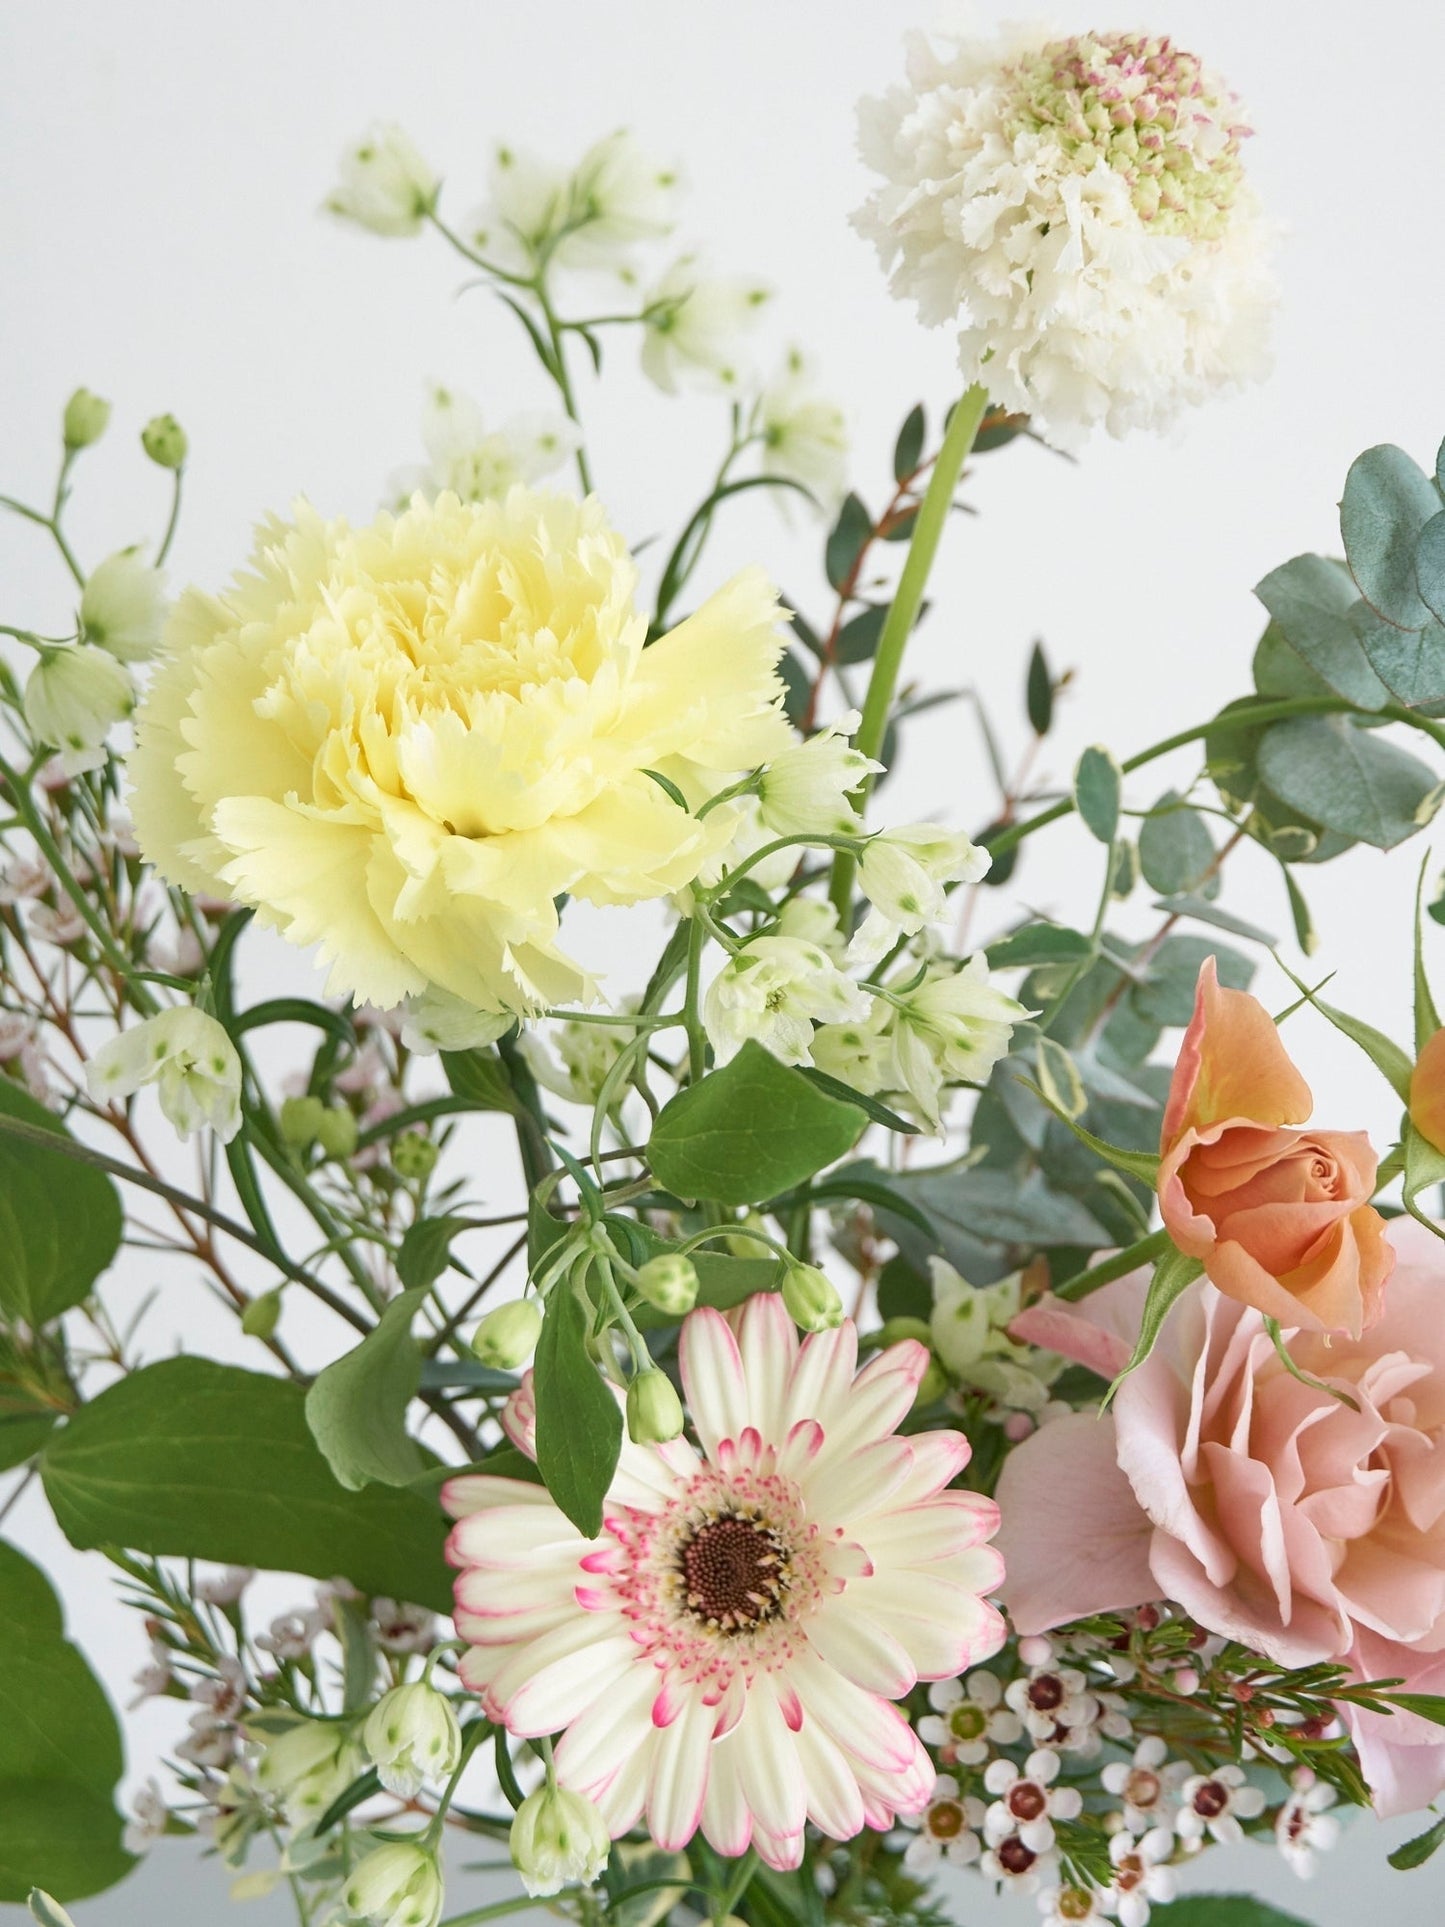 【mother's day】Bouquet S 【Delivery date: 5/12 (Sun)】